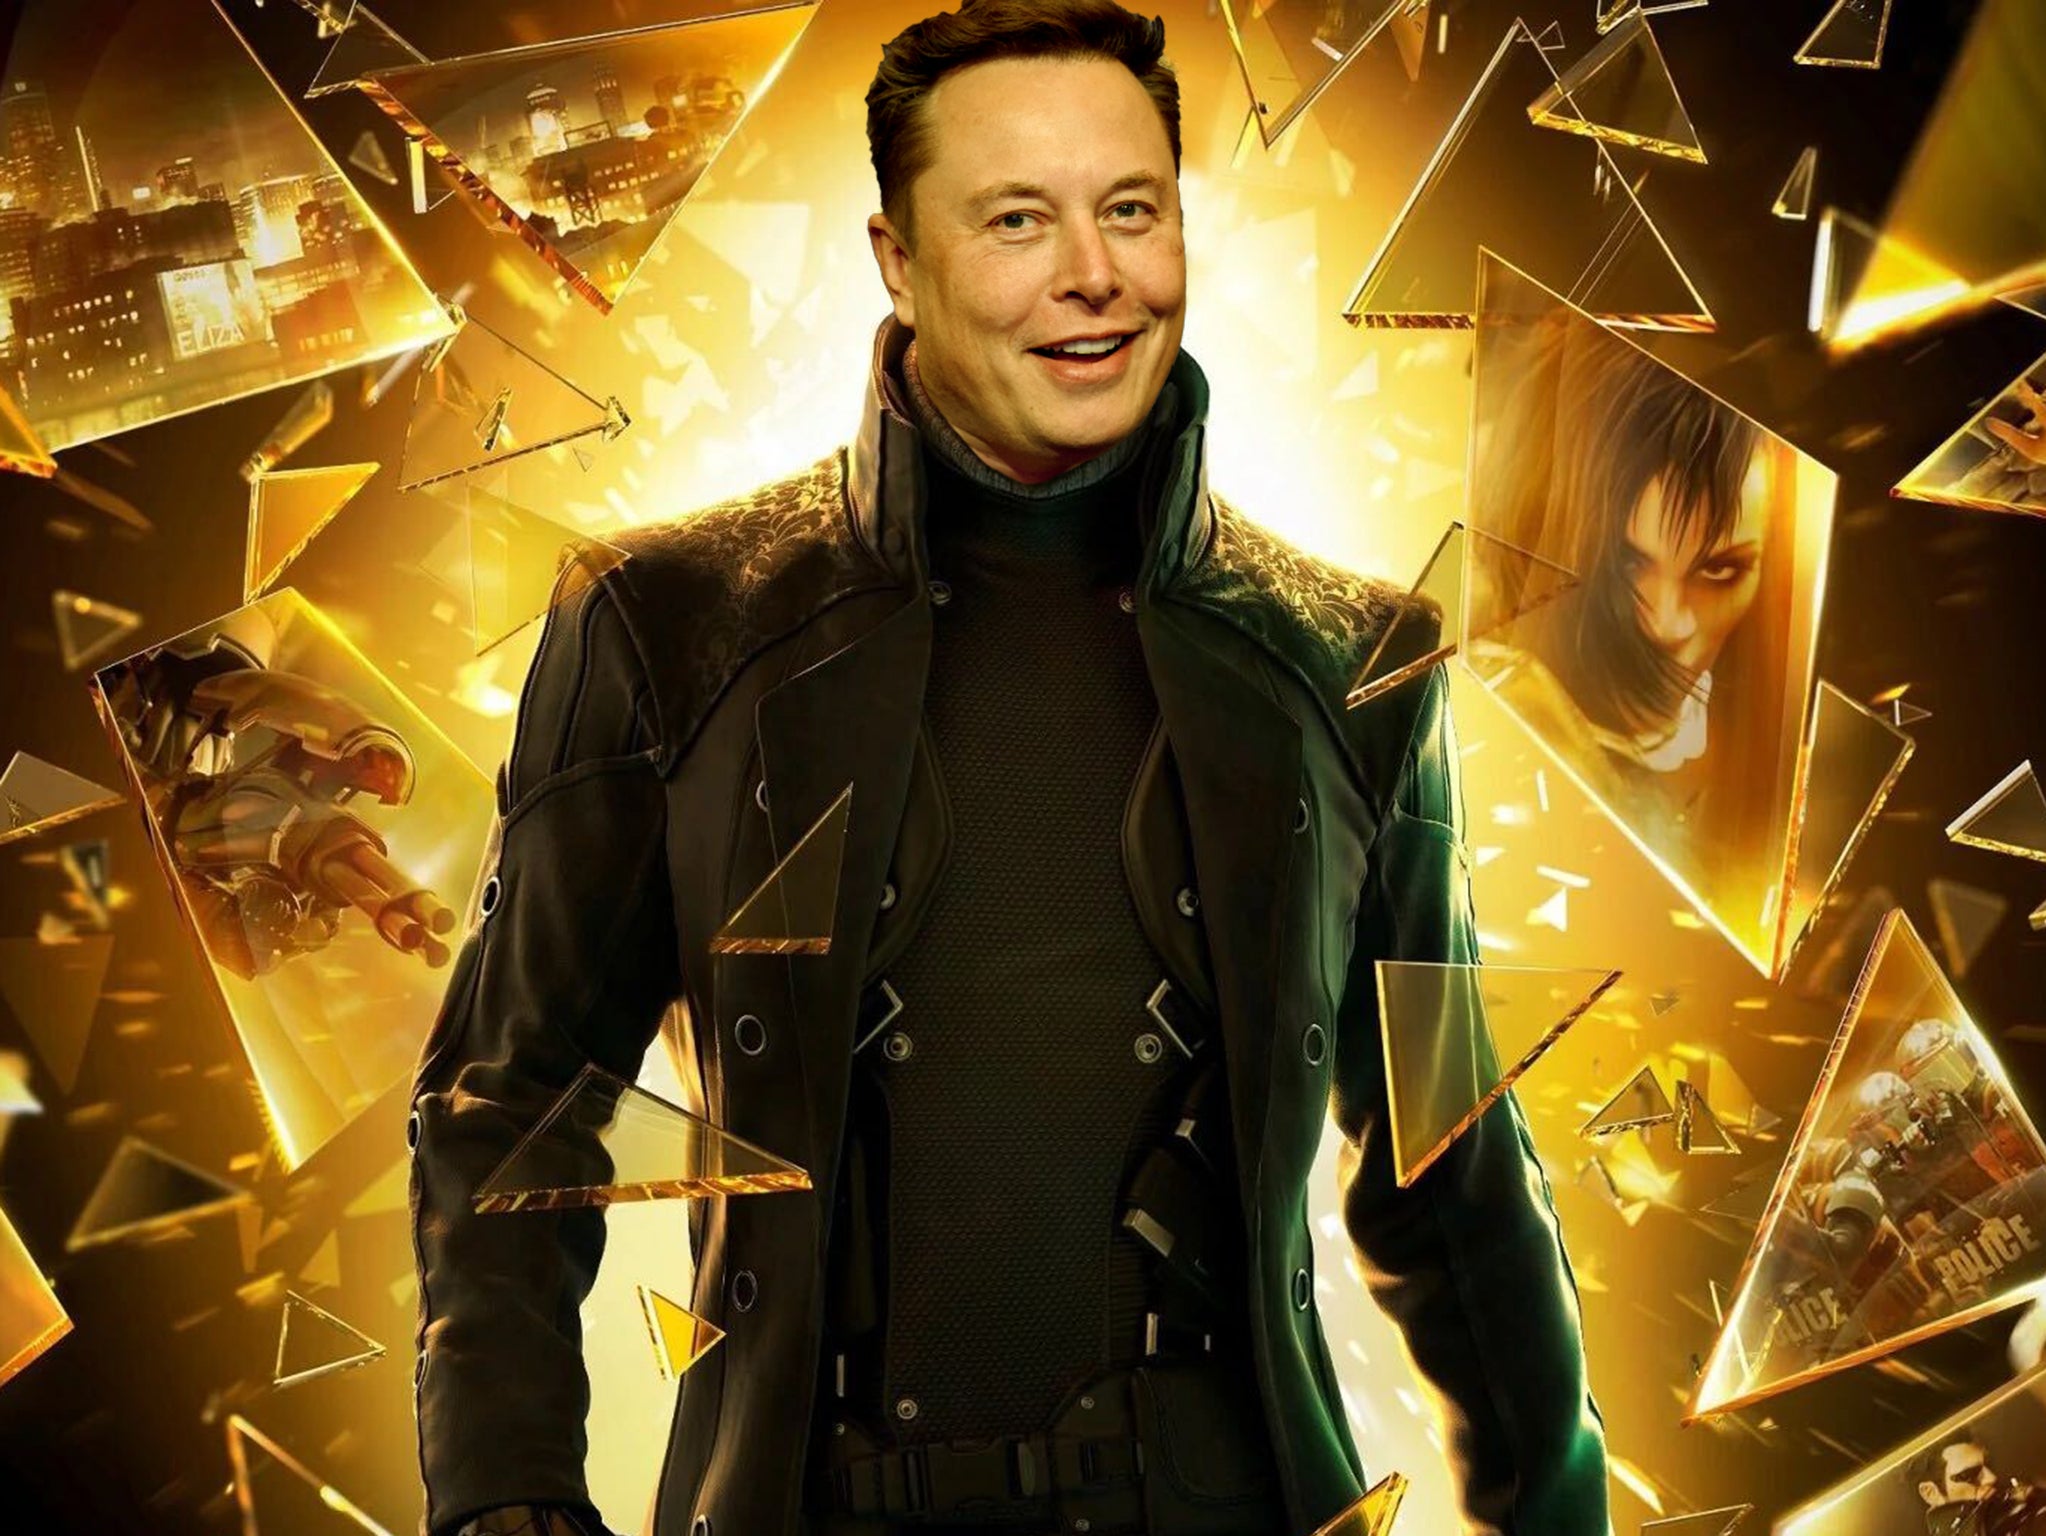 Like the protagonist of Deus Ex: Human Revolution, Elon Musk never asked for this